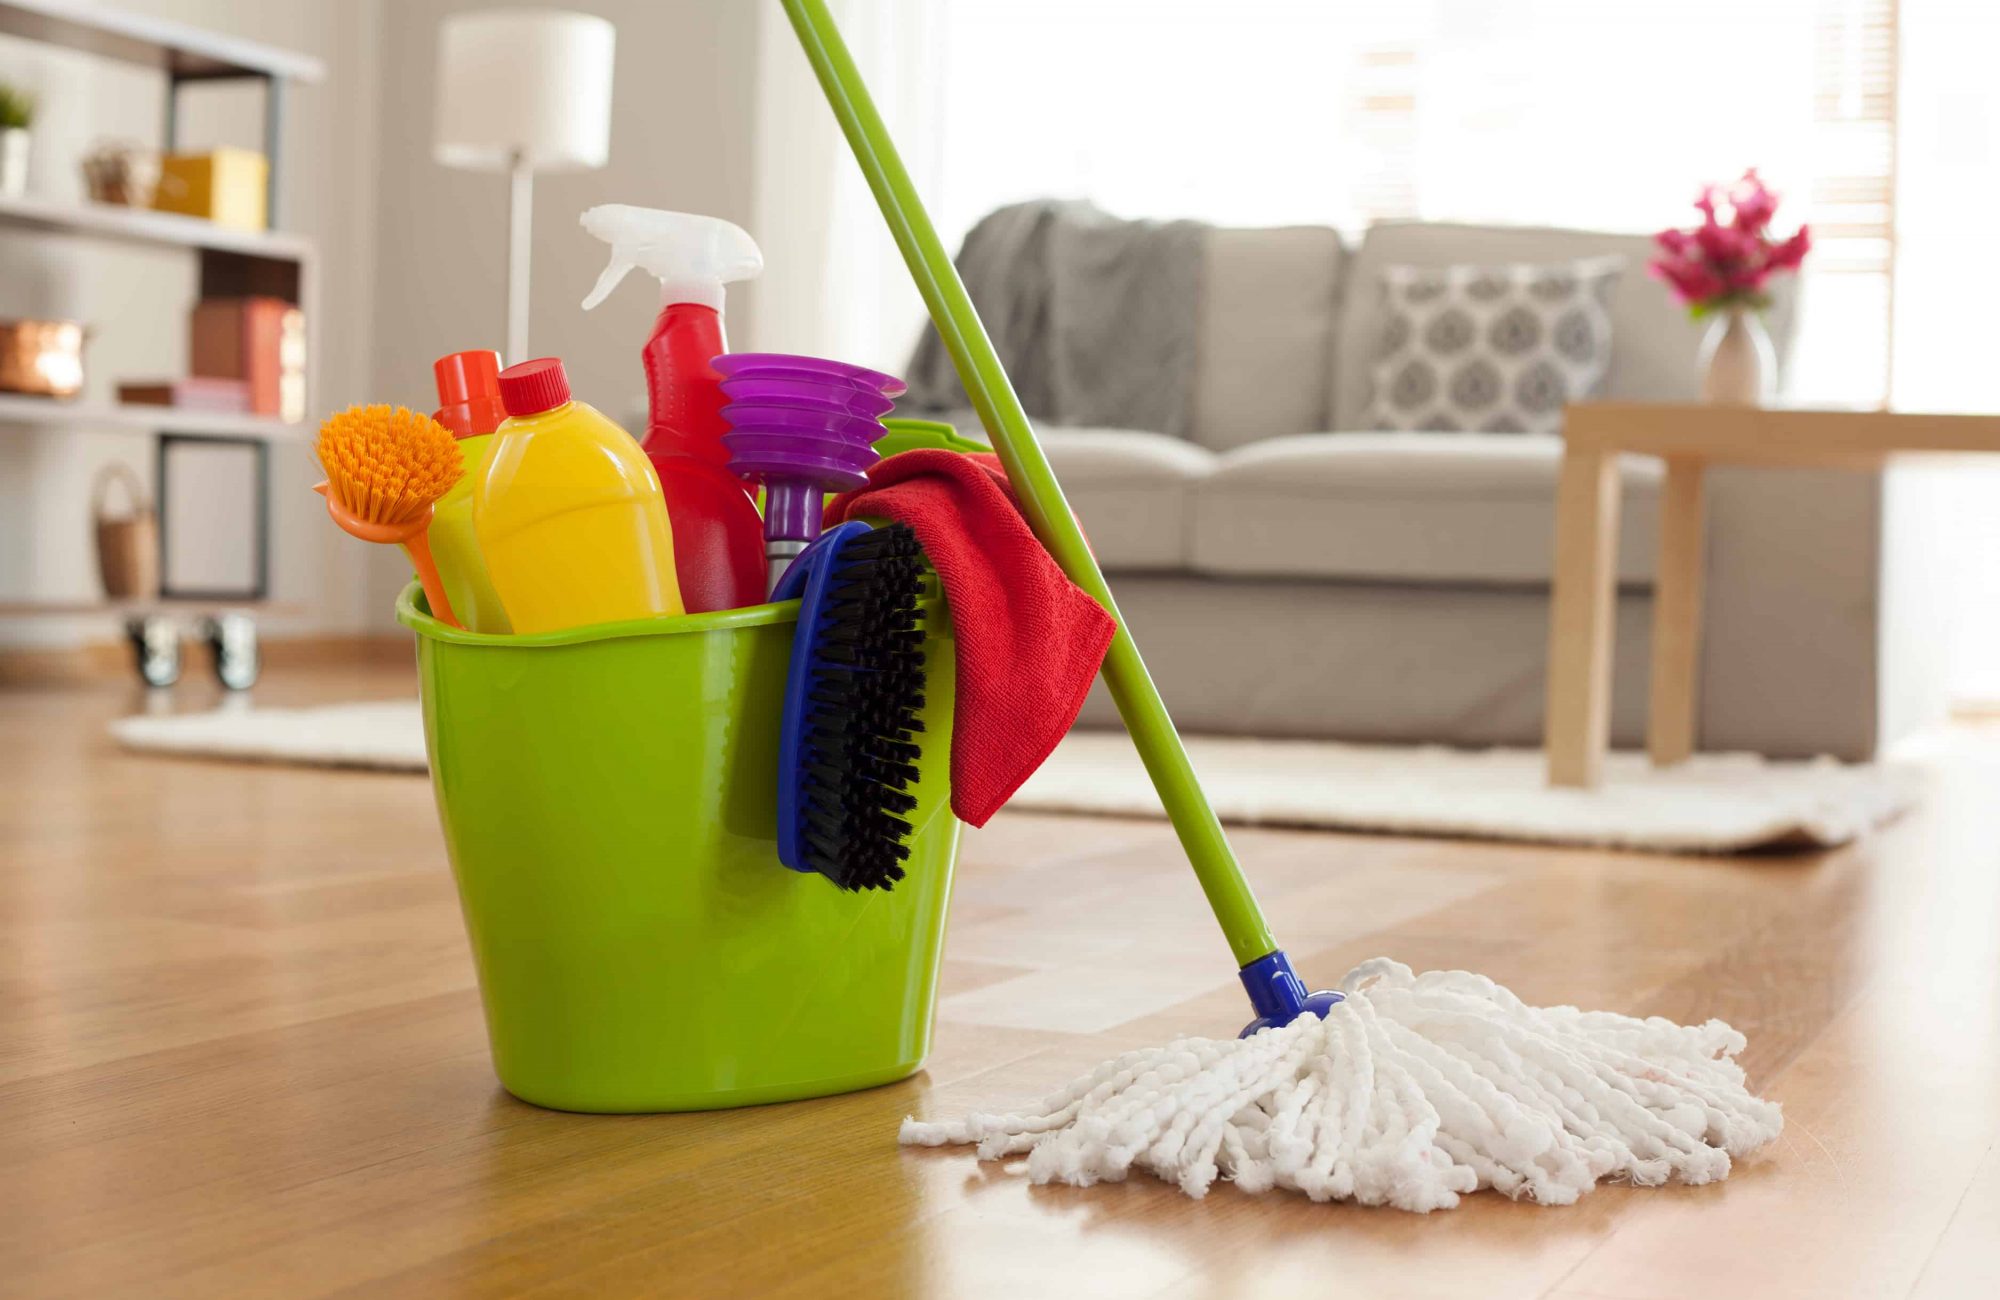 Cleaning Hardwood Floors 4 Easy, What Is Safe For Cleaning Hardwood Floors